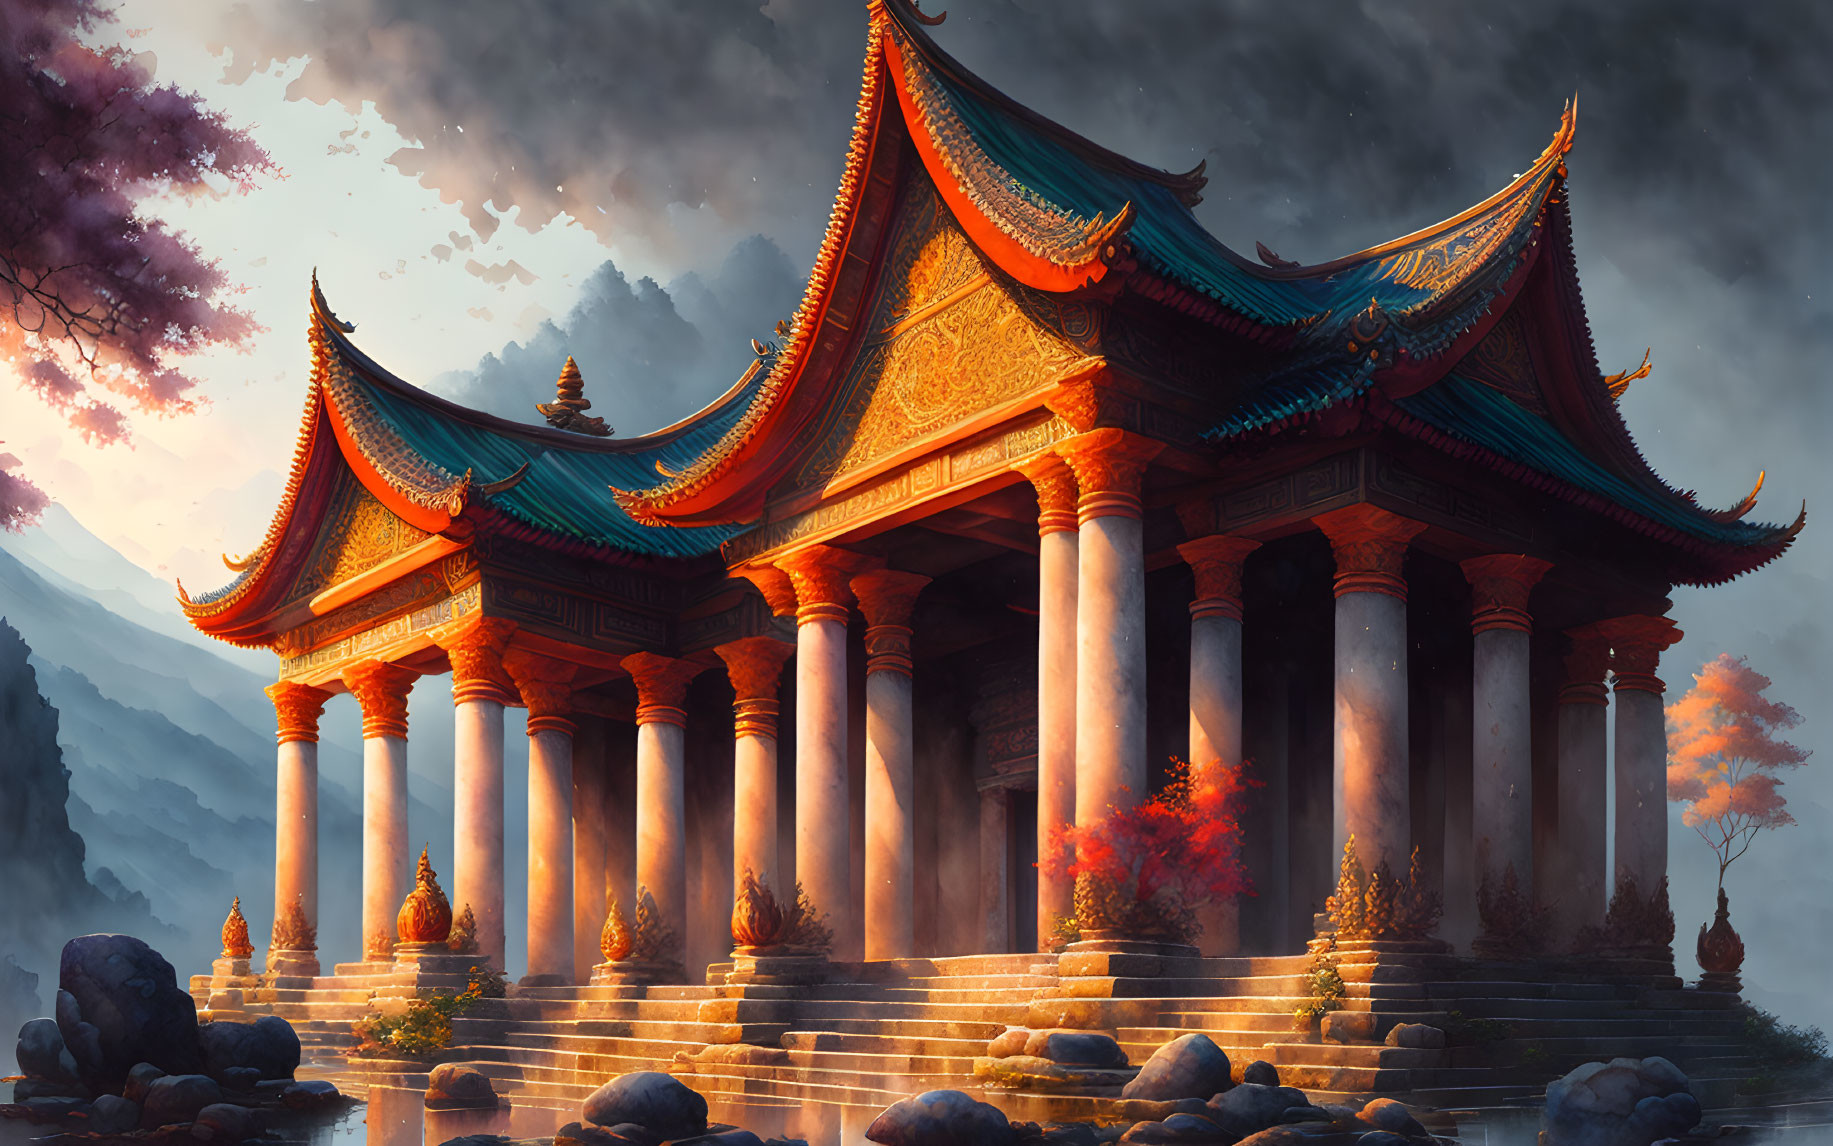 Illustration of Ancient Asian Temple with Red and Blue Roofs